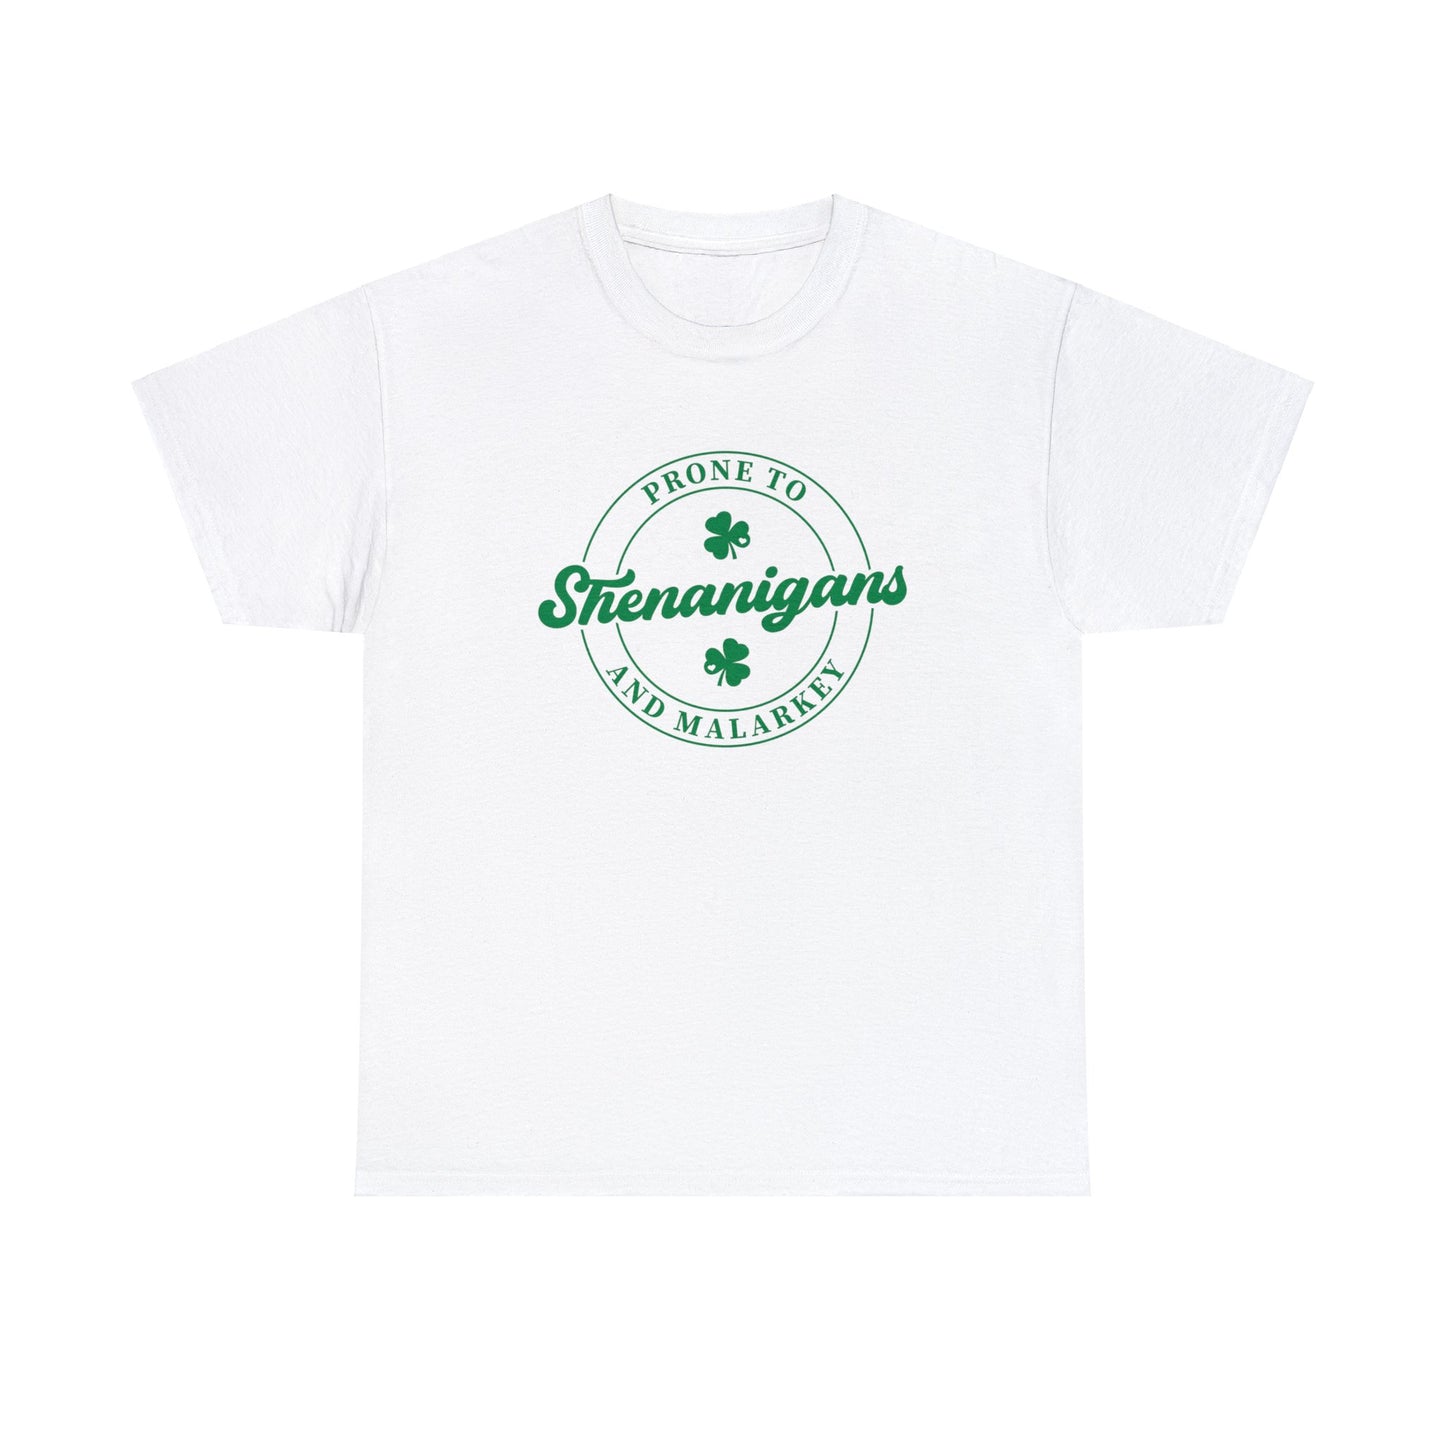 Shenanigans T-Shirt For St. Paddy's Day T Shirt For Malarky TShirt For St. Patrick's Day Tee